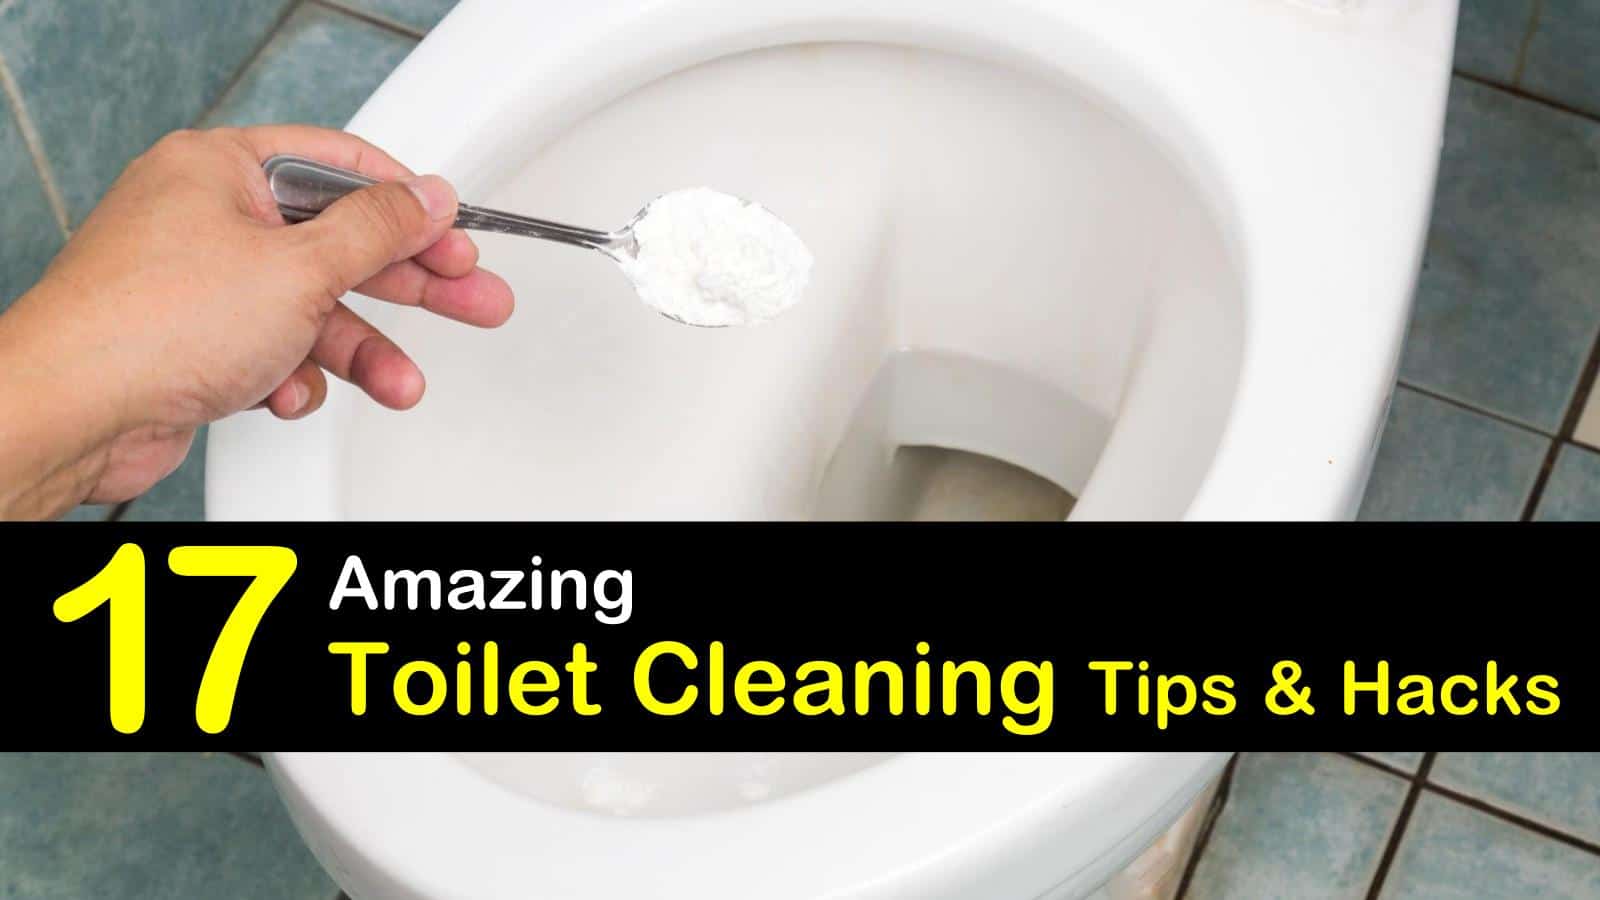 14 Amazing Ways to Clean a Toilet